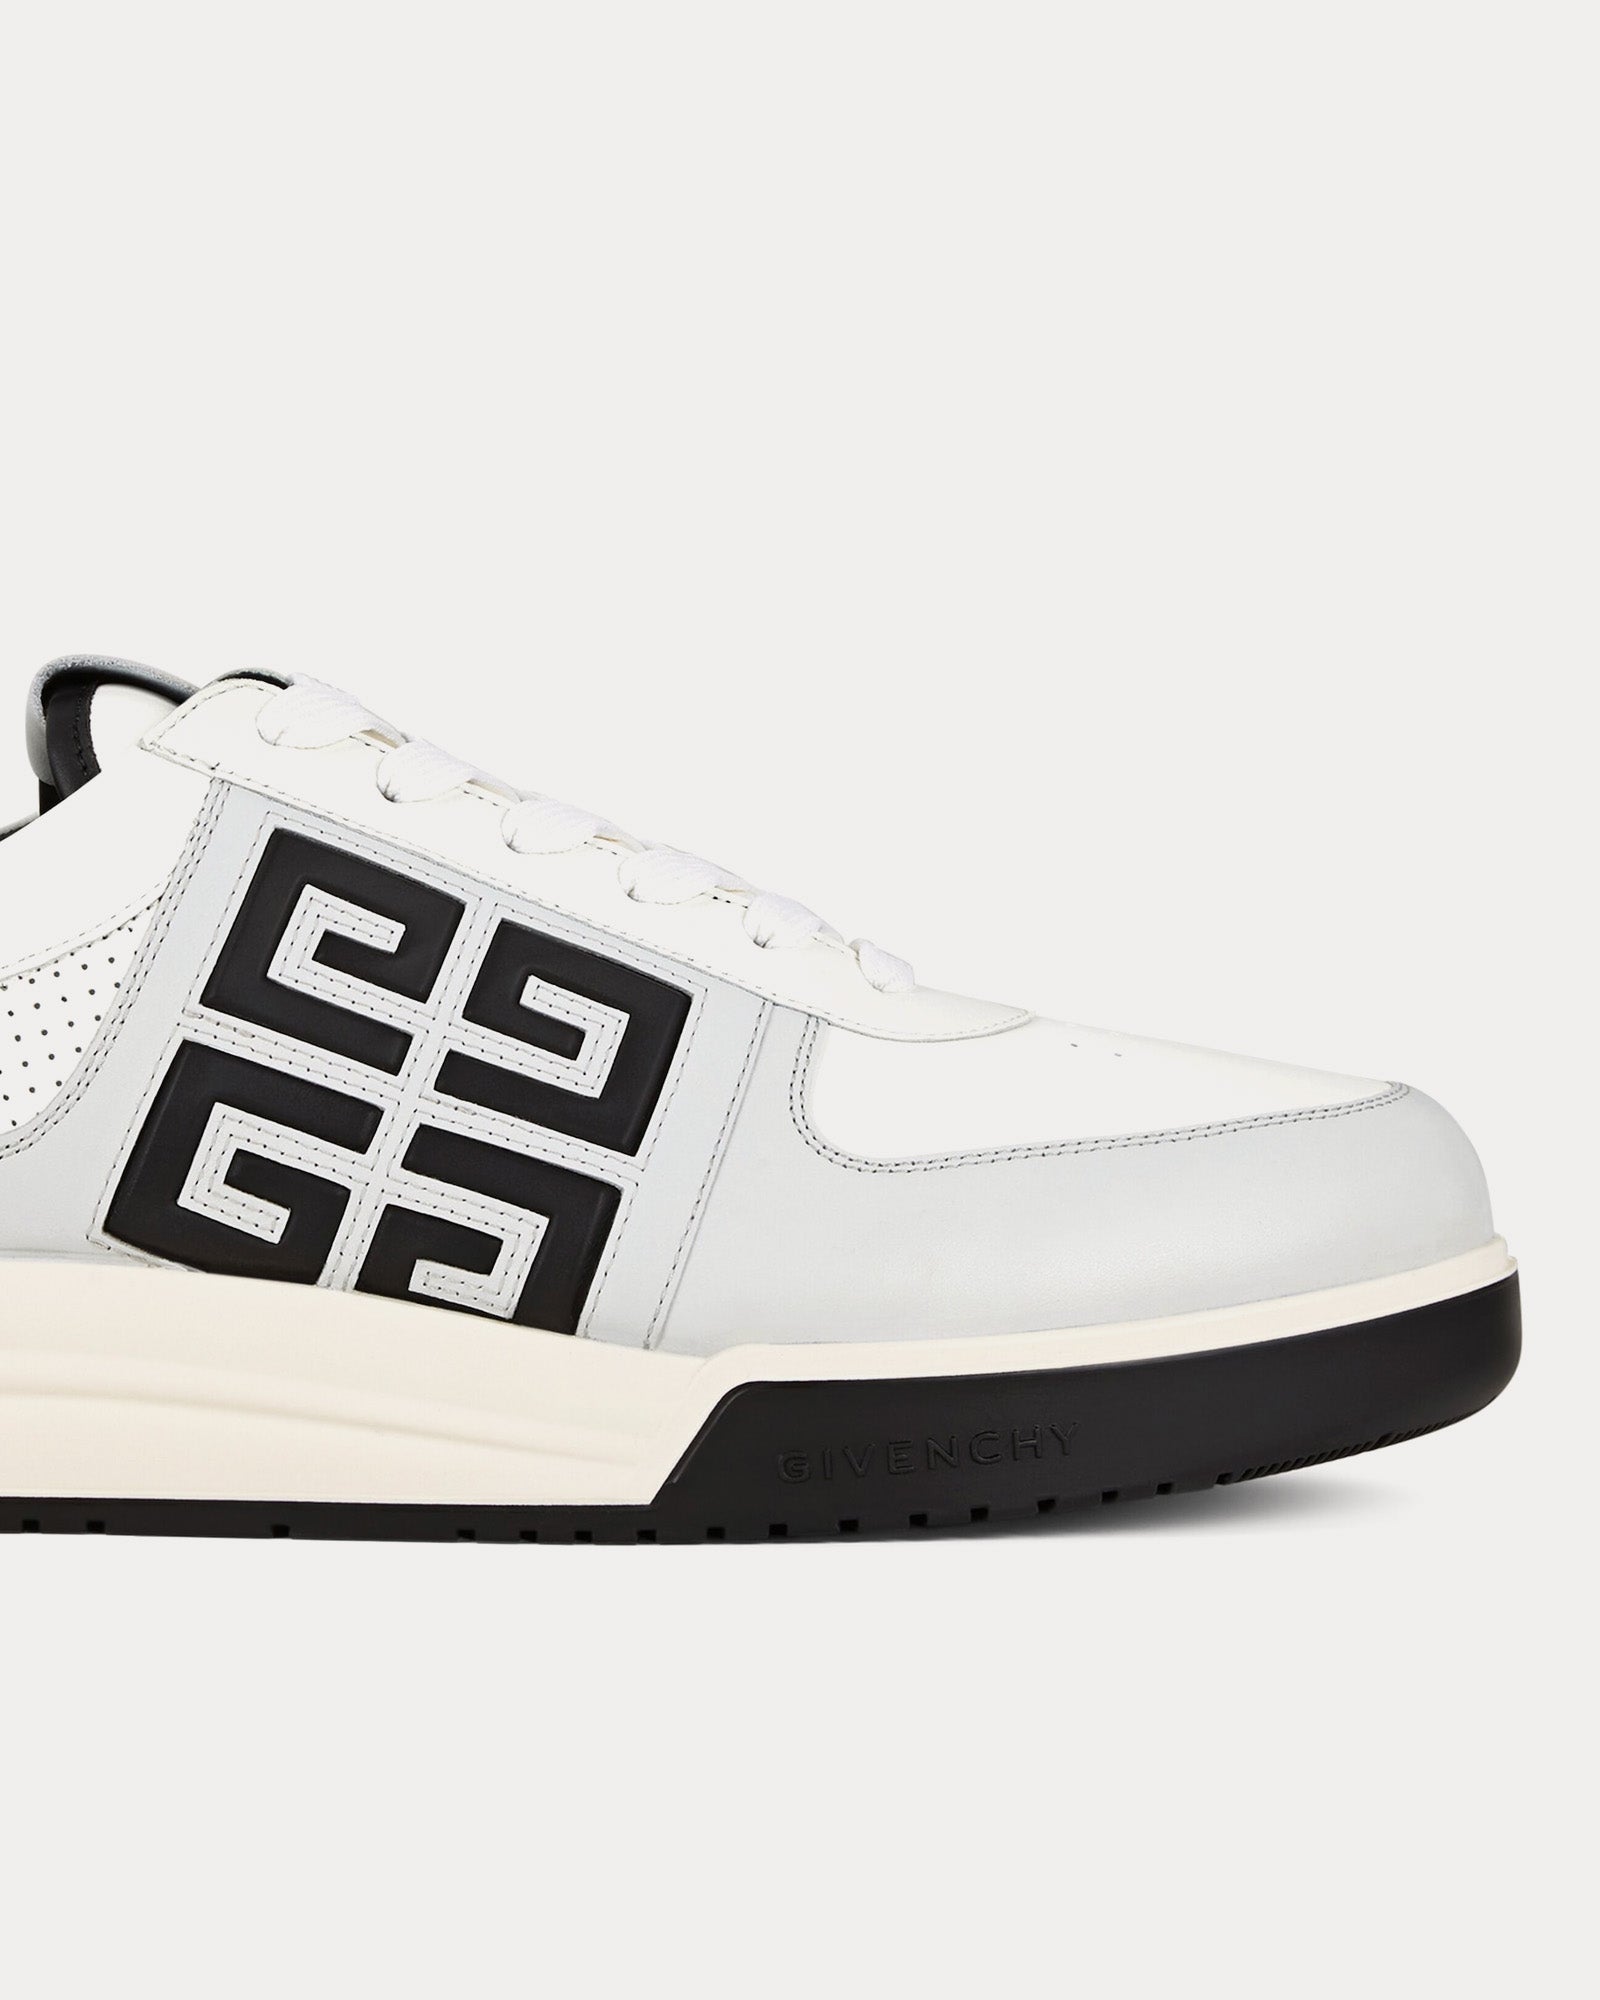 Givenchy - G4 Leather & Perforated Leather Grey / Black Low Top Sneakers